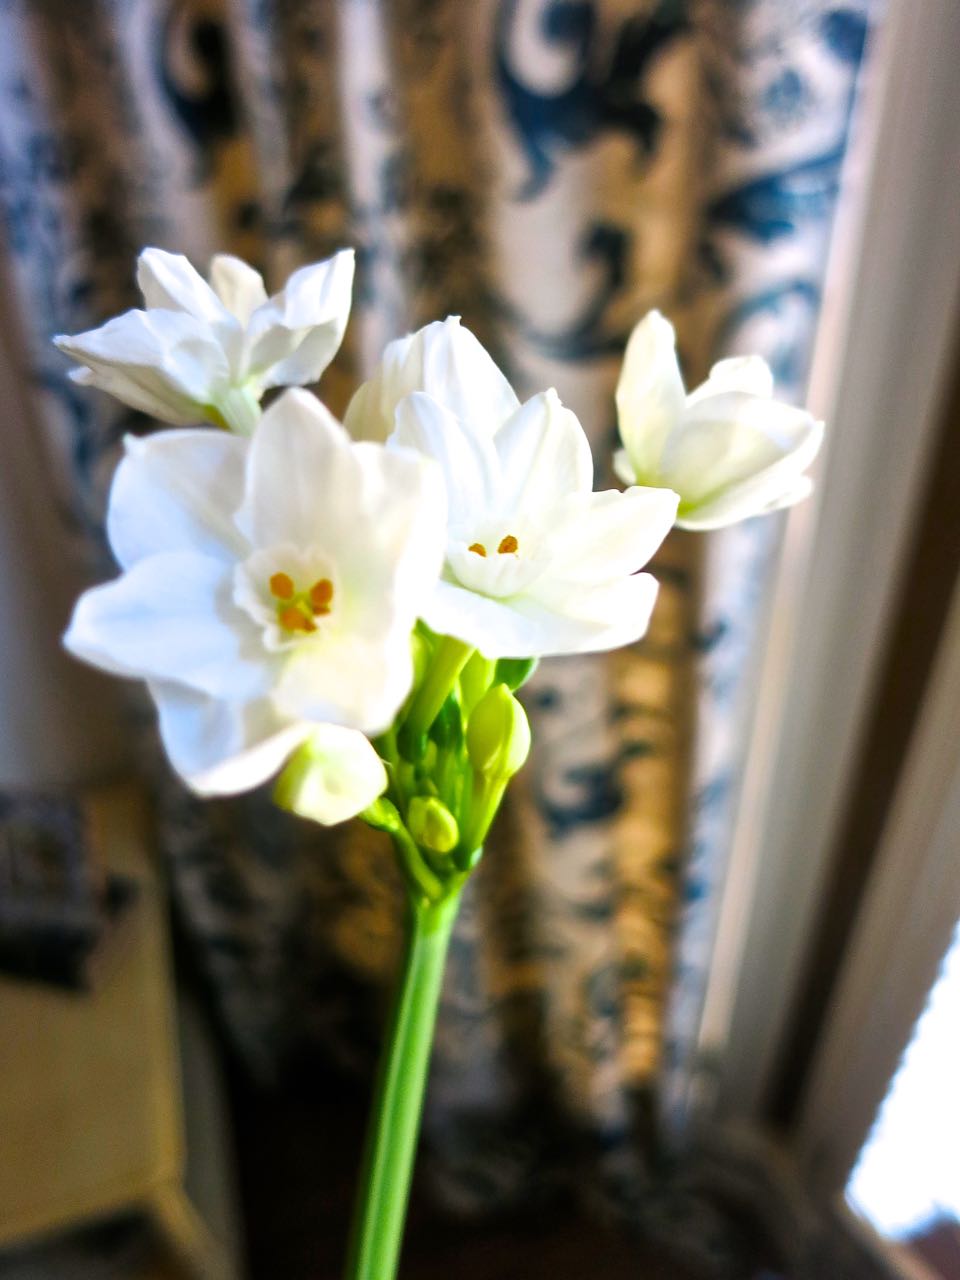 Growing Paperwhites in time for the holidays. These pretty delicate flowers are so easy to grow. You can get creative with your growing containers too!